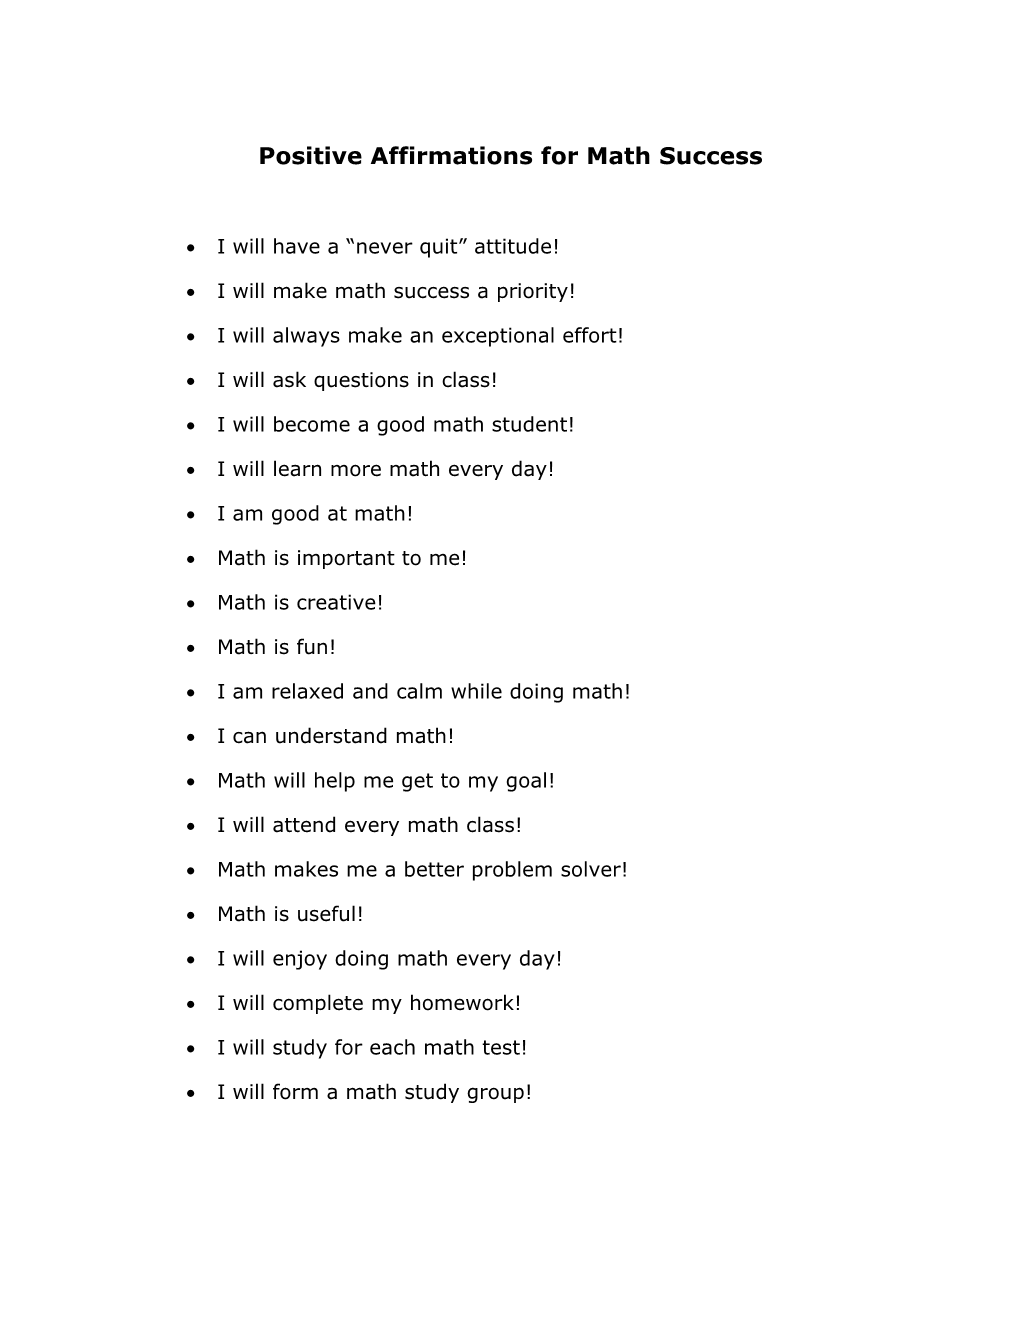 Positive Affirmations for Math Success